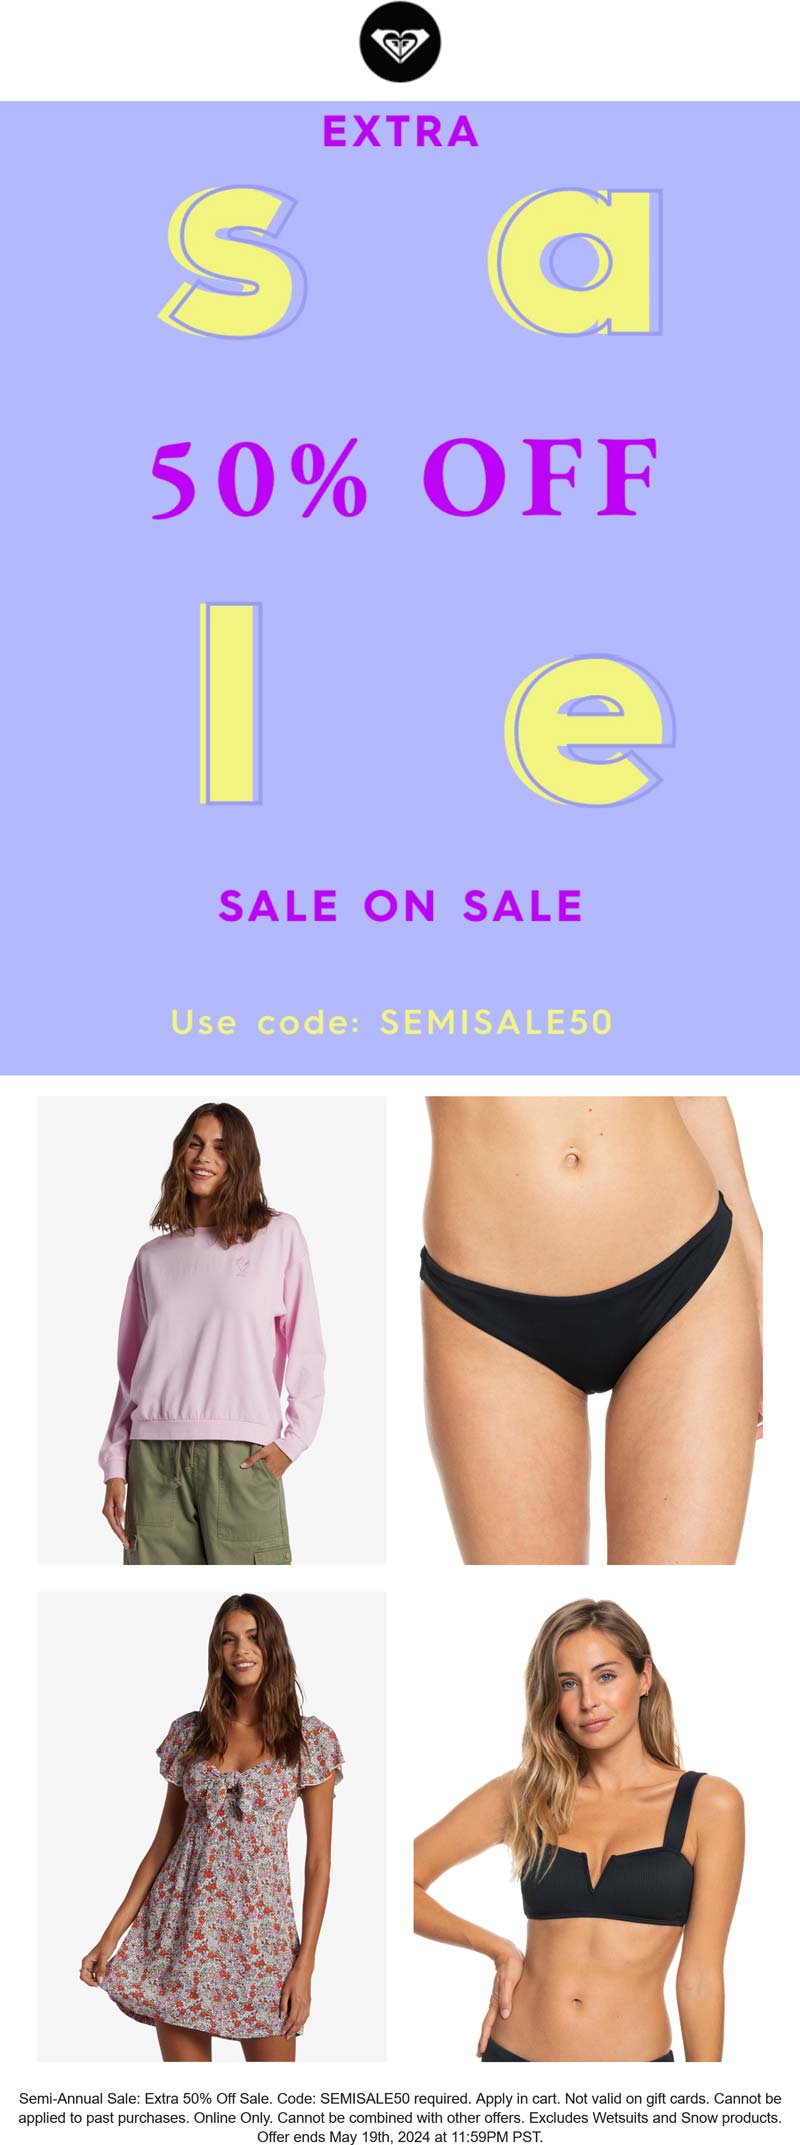 Roxy stores Coupon  Extra 50% off sale items today at Roxy via promo code SEMISALE50 #roxy 